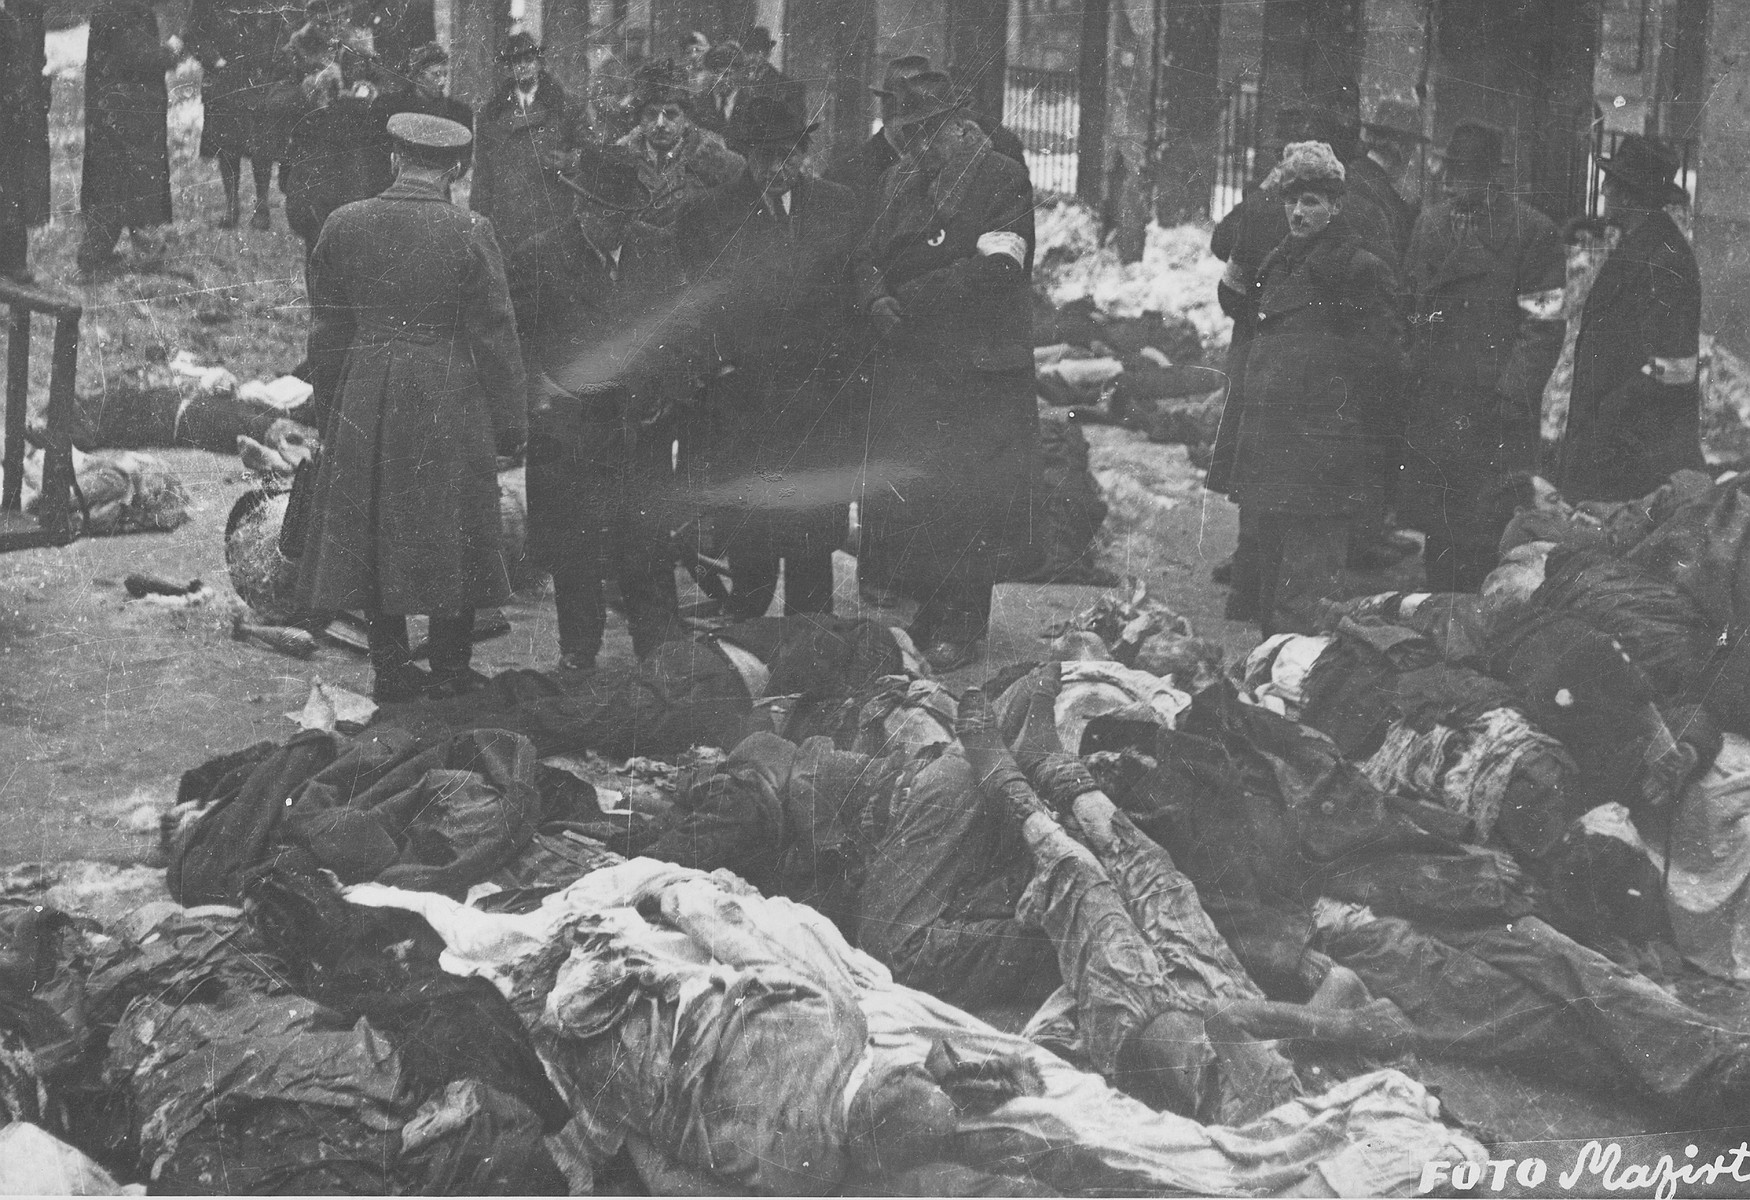 Members of the Commission for the Investigation of Nazi and Arrow Cross Atrocities examine the bodies of Jews in the courtyard of the Dohany Street Synagogue.

During the last few months of the war in Hungary, the Nyilas (Arrow Cross) exploited the anarchic conditions in the areas still under their control to continue their excesses against the Jews.  This was particularly true in Budapest, despite the fact that the Soviet army had completely encircled the city by December 27, 1944.  The reign of terror that had begun with Szalaszi's assumption of power on October 15, 1944, went almost completely unchecked after the beginning of the Soviet siege on December 9.  Gangs of armed Nyilas--mostly teenagers--roamed the city hunting for Jews in hiding.  They searched them out in hospitals, shelters, homes outside the ghetto, in the International Ghetto, and in the large ghetto.  After robbing the Jews of their remaining valuables, the Nyilas shot them on the spot or marched them to the banks of the Danube, where they shot them, and threw their bodies into the river.  A large number of Jews who were murdered in the ghetto were buried in mass graves in the courtyard of the Dohany Street Synagogue.

The most horrific of these attacks occurred on the Pest side of the capital, at the two Jewish hospitals located on Maros and Varosmajor streets.  The Maros Street hospital, which had operated under the protection of the International Red Cross during the German occupation, was attacked on January 11, 1945.  After the initial melee, during which Nyilas gang members wantonly destroyed hospital equipment, threw patients out of their beds and trampled them, and murdered staff members, survivors were ordered to dig a mass grave, remove and bury the bodies.  They were then shot and buried in the grave themselves.  Only one nurse survived of the 92 people that were in the hospital at the time.  Three days later, on January 14, the hospital on Varosmajor Street was attacked, resulting in the deaths of 150 patients and medical staff.  These manhunts and massacres continued unabated until the liberation of Budapest in April.  [R. Braham, "The Politics of Genocide," vol. 2: 995-1007]